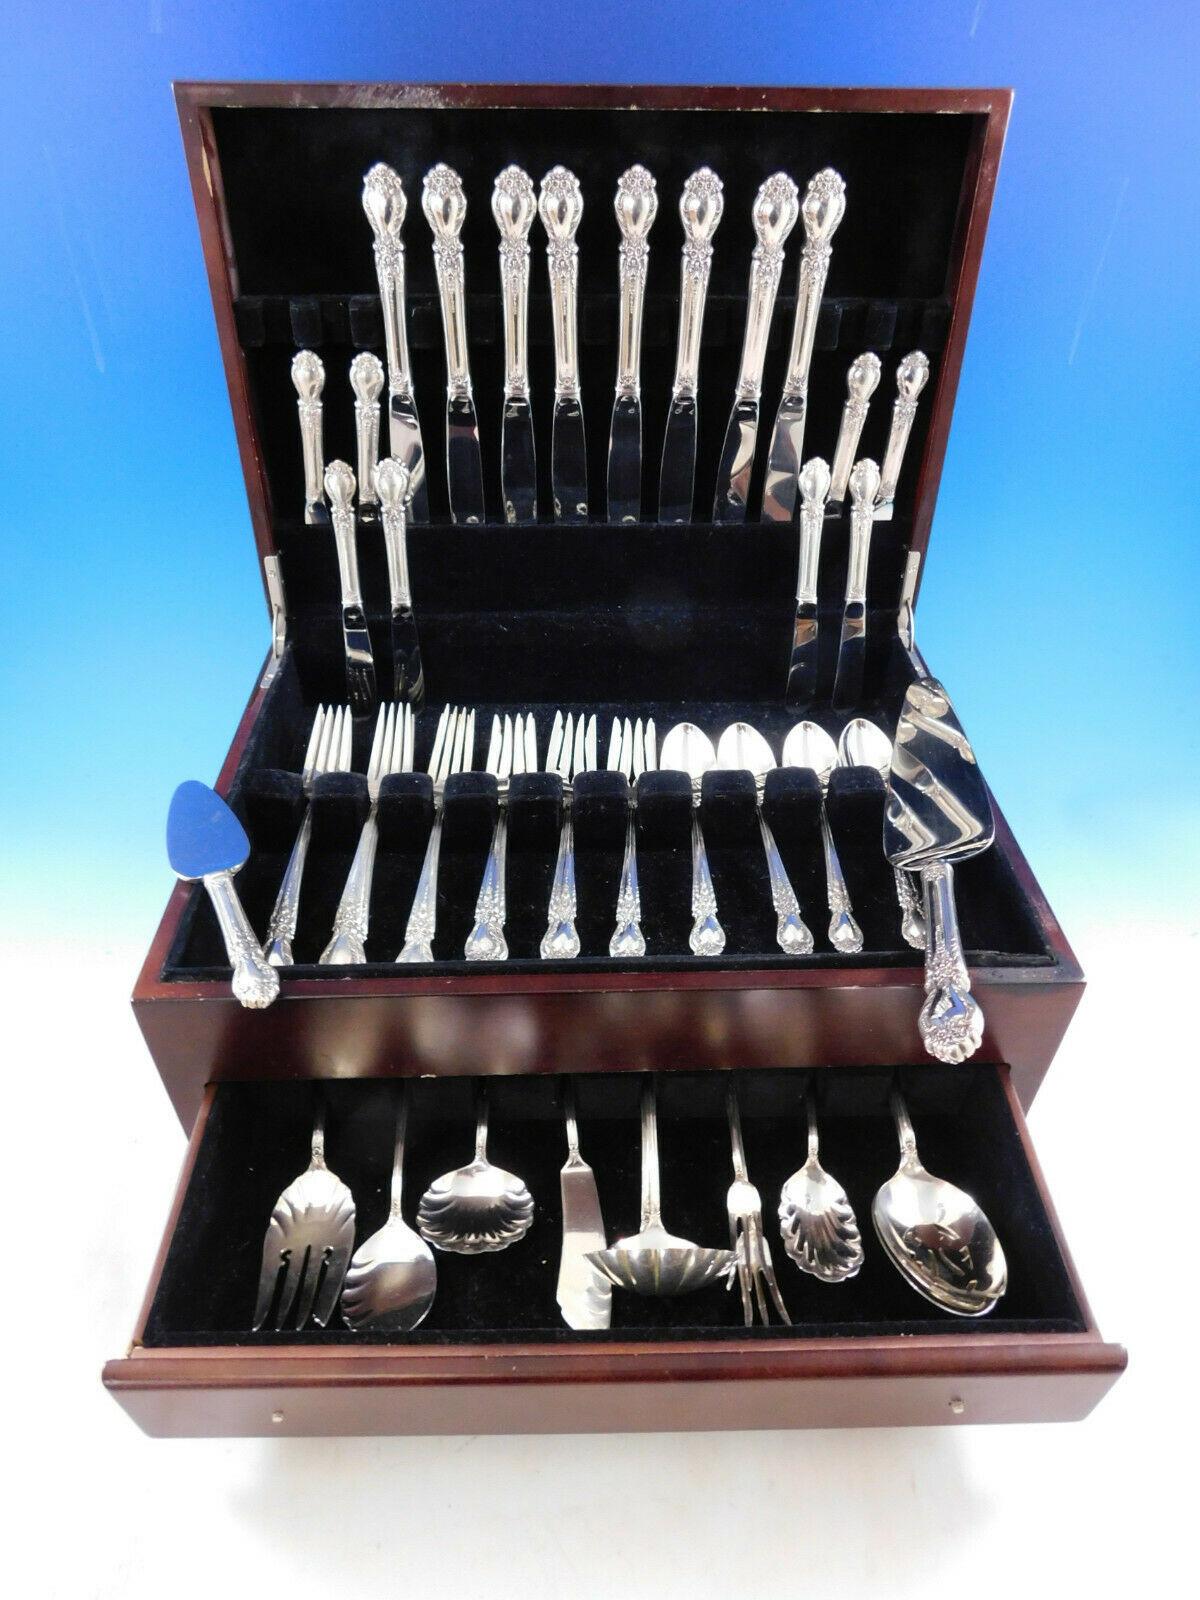 Brocade by international sterling silver Flatware set - 53 Pieces. This set includes:
8 knives, 9 1/4